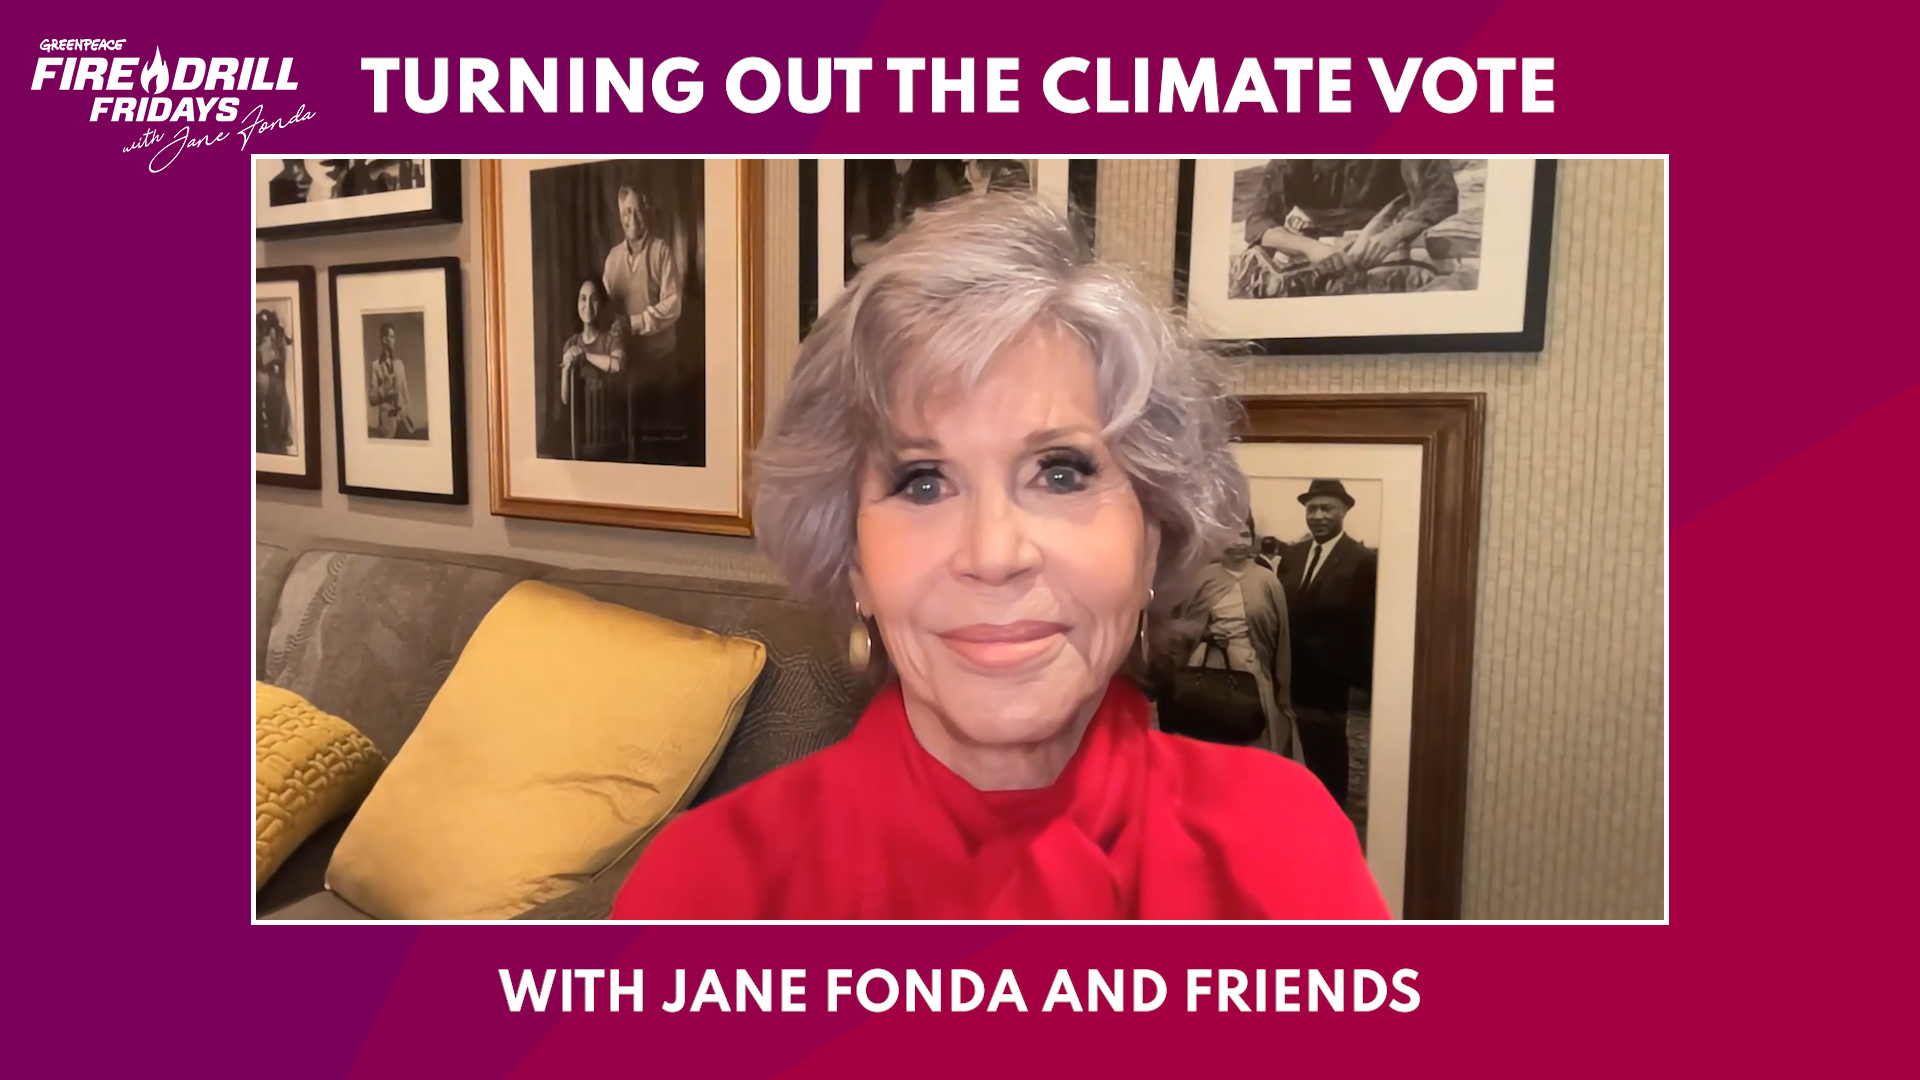 Watch Jane Fonda and Guests Talk About Turning Out the Climate Vote